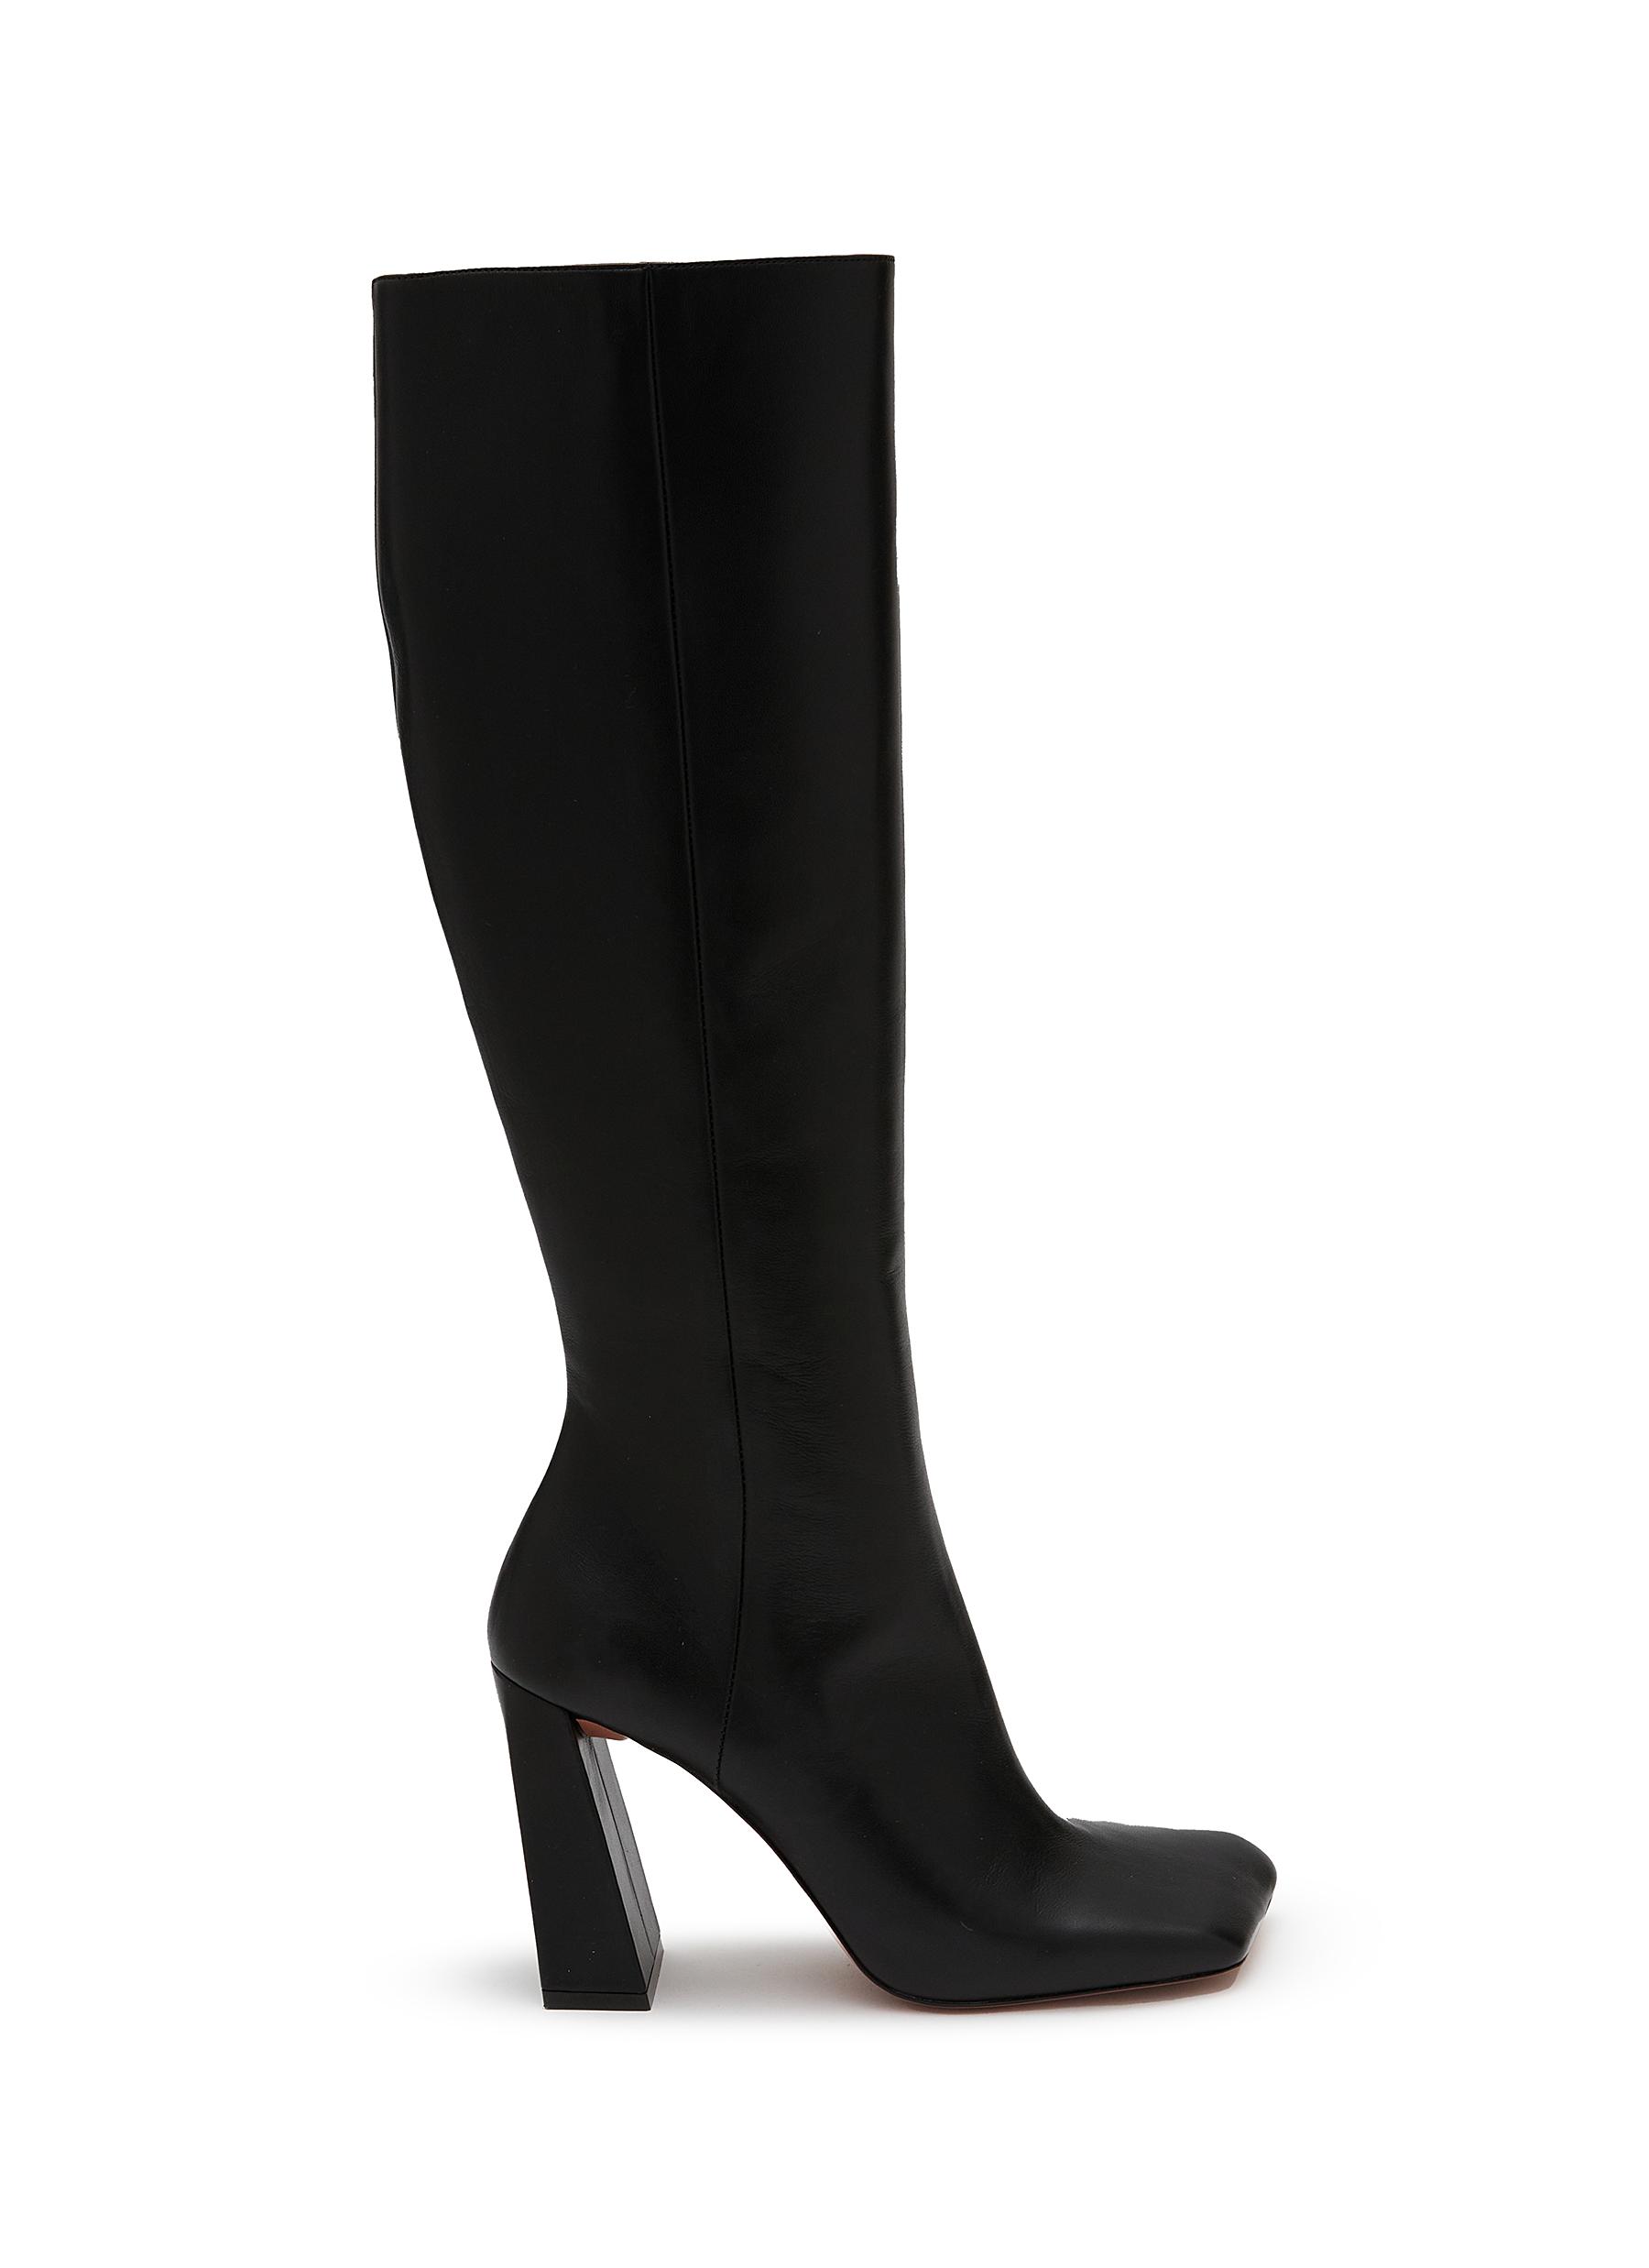 Black Faux Suede Knee High Ruched Boot | SilkFred